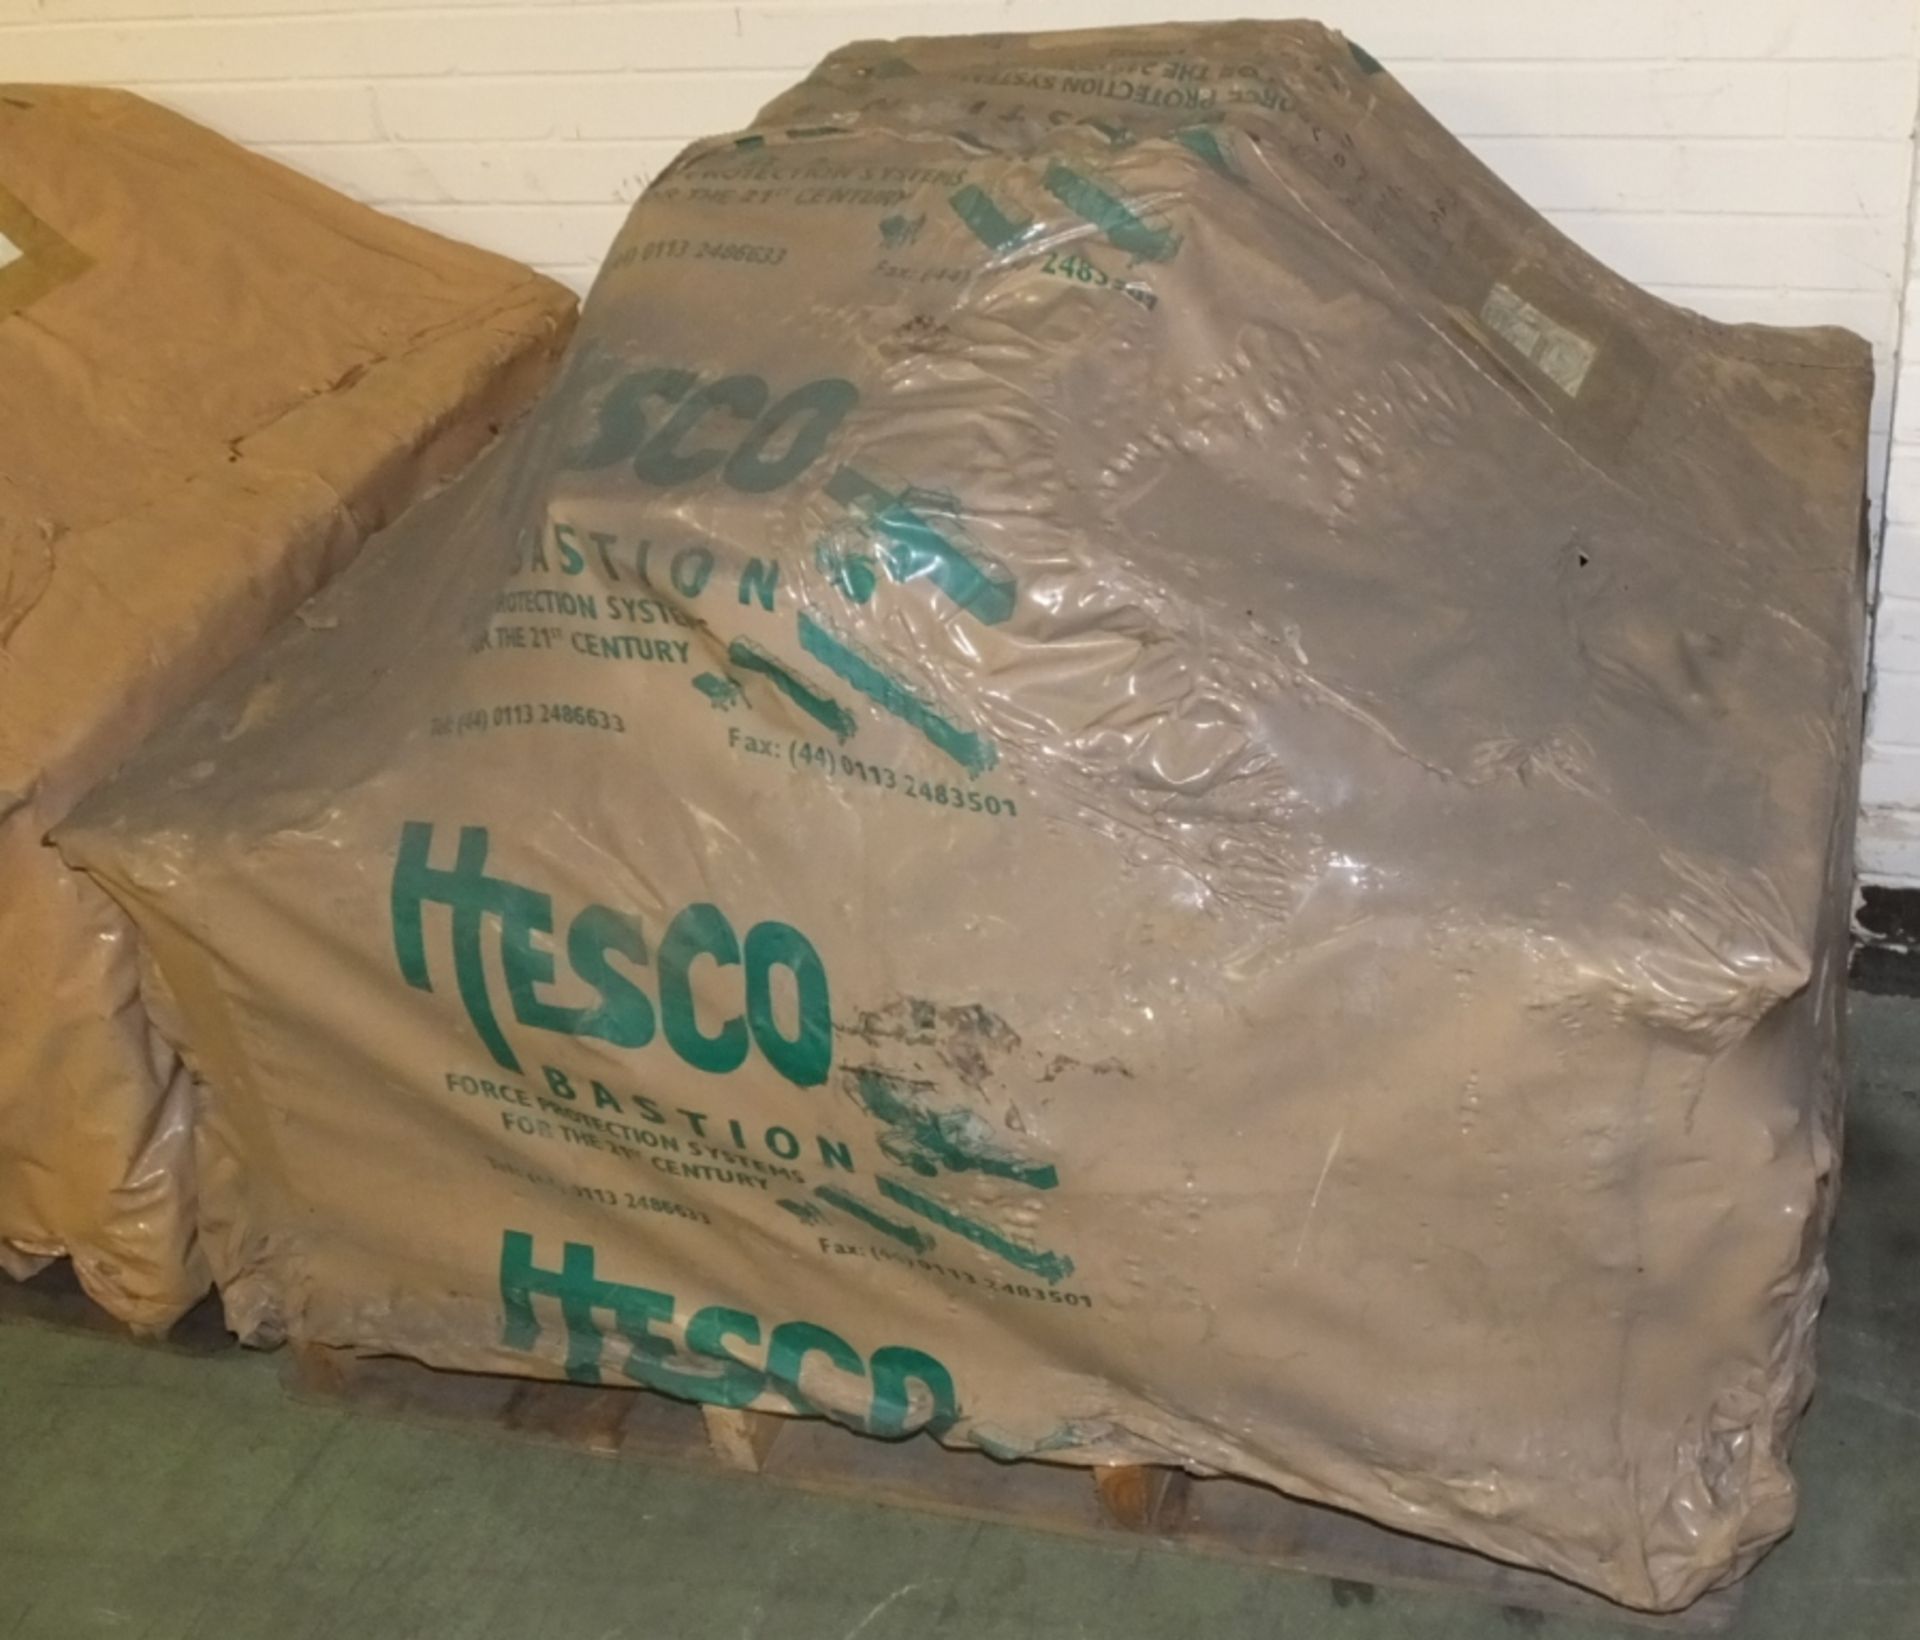 3x Hesco Bastion Sangar (Guard Post Kits) ideal for Paintball, Airsoft, Militaria - £5 lif - Image 11 of 12